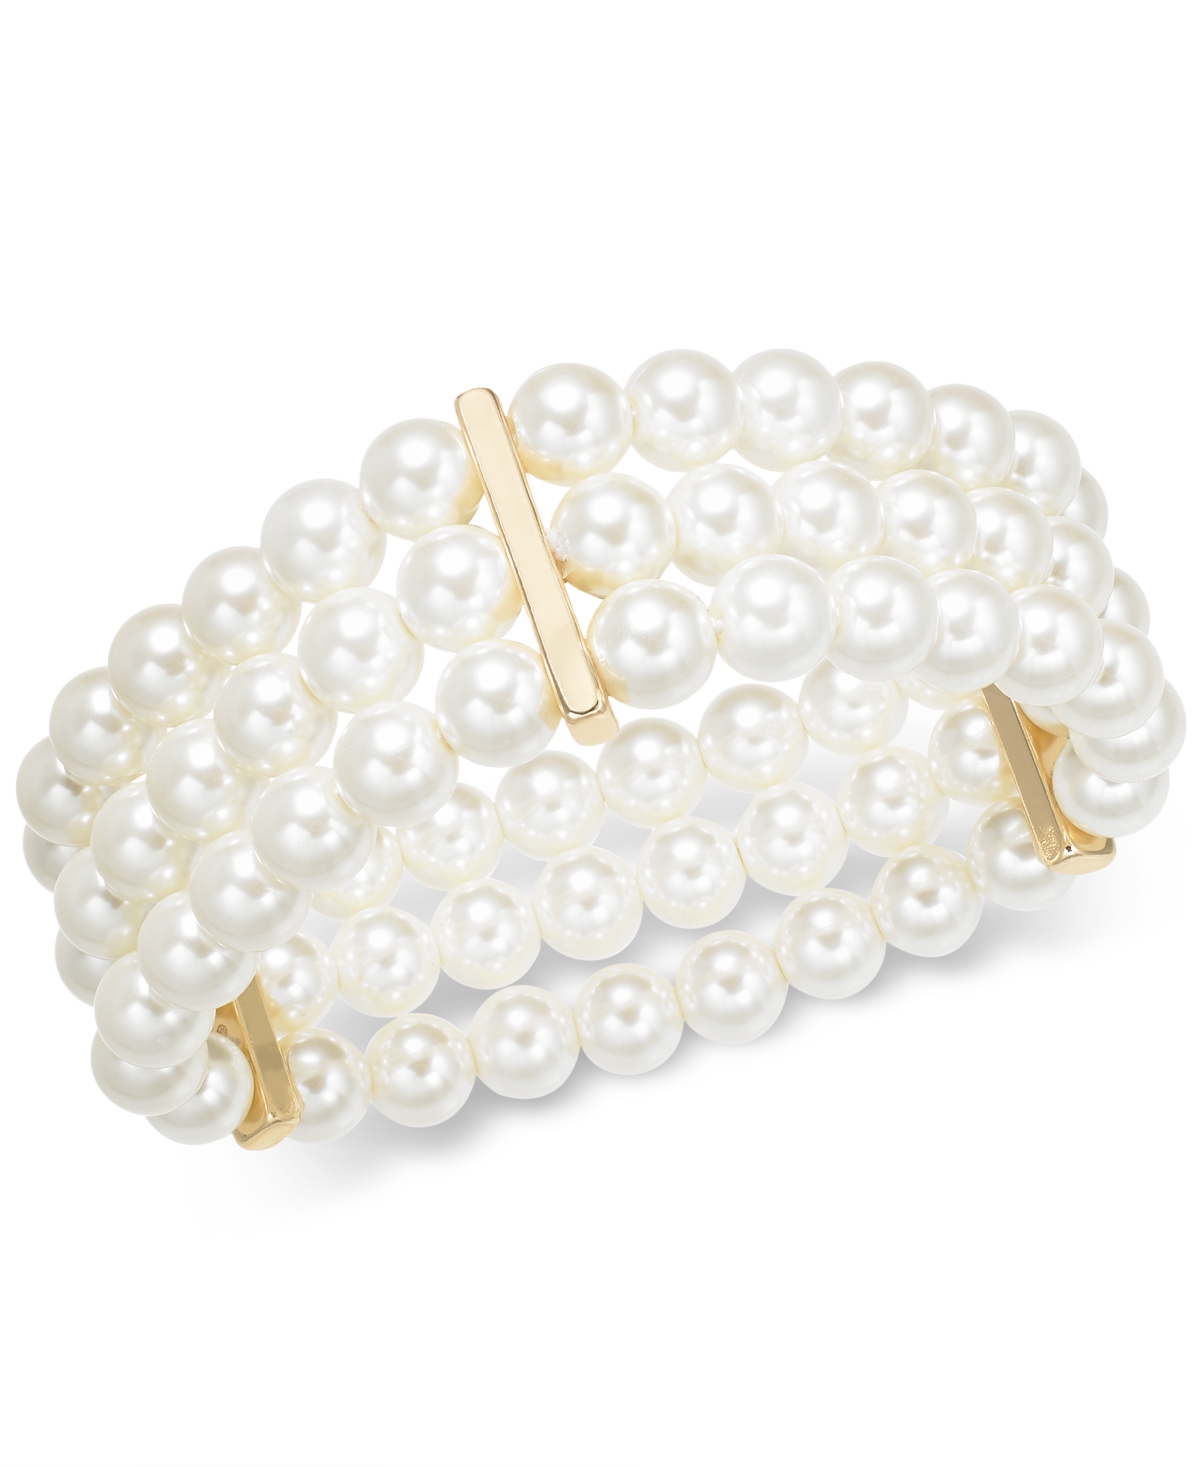 Gold-Tone Imitation Pearl Triple-Row Stretch Bracelet, Created for Macy's - Gold/White Pearl